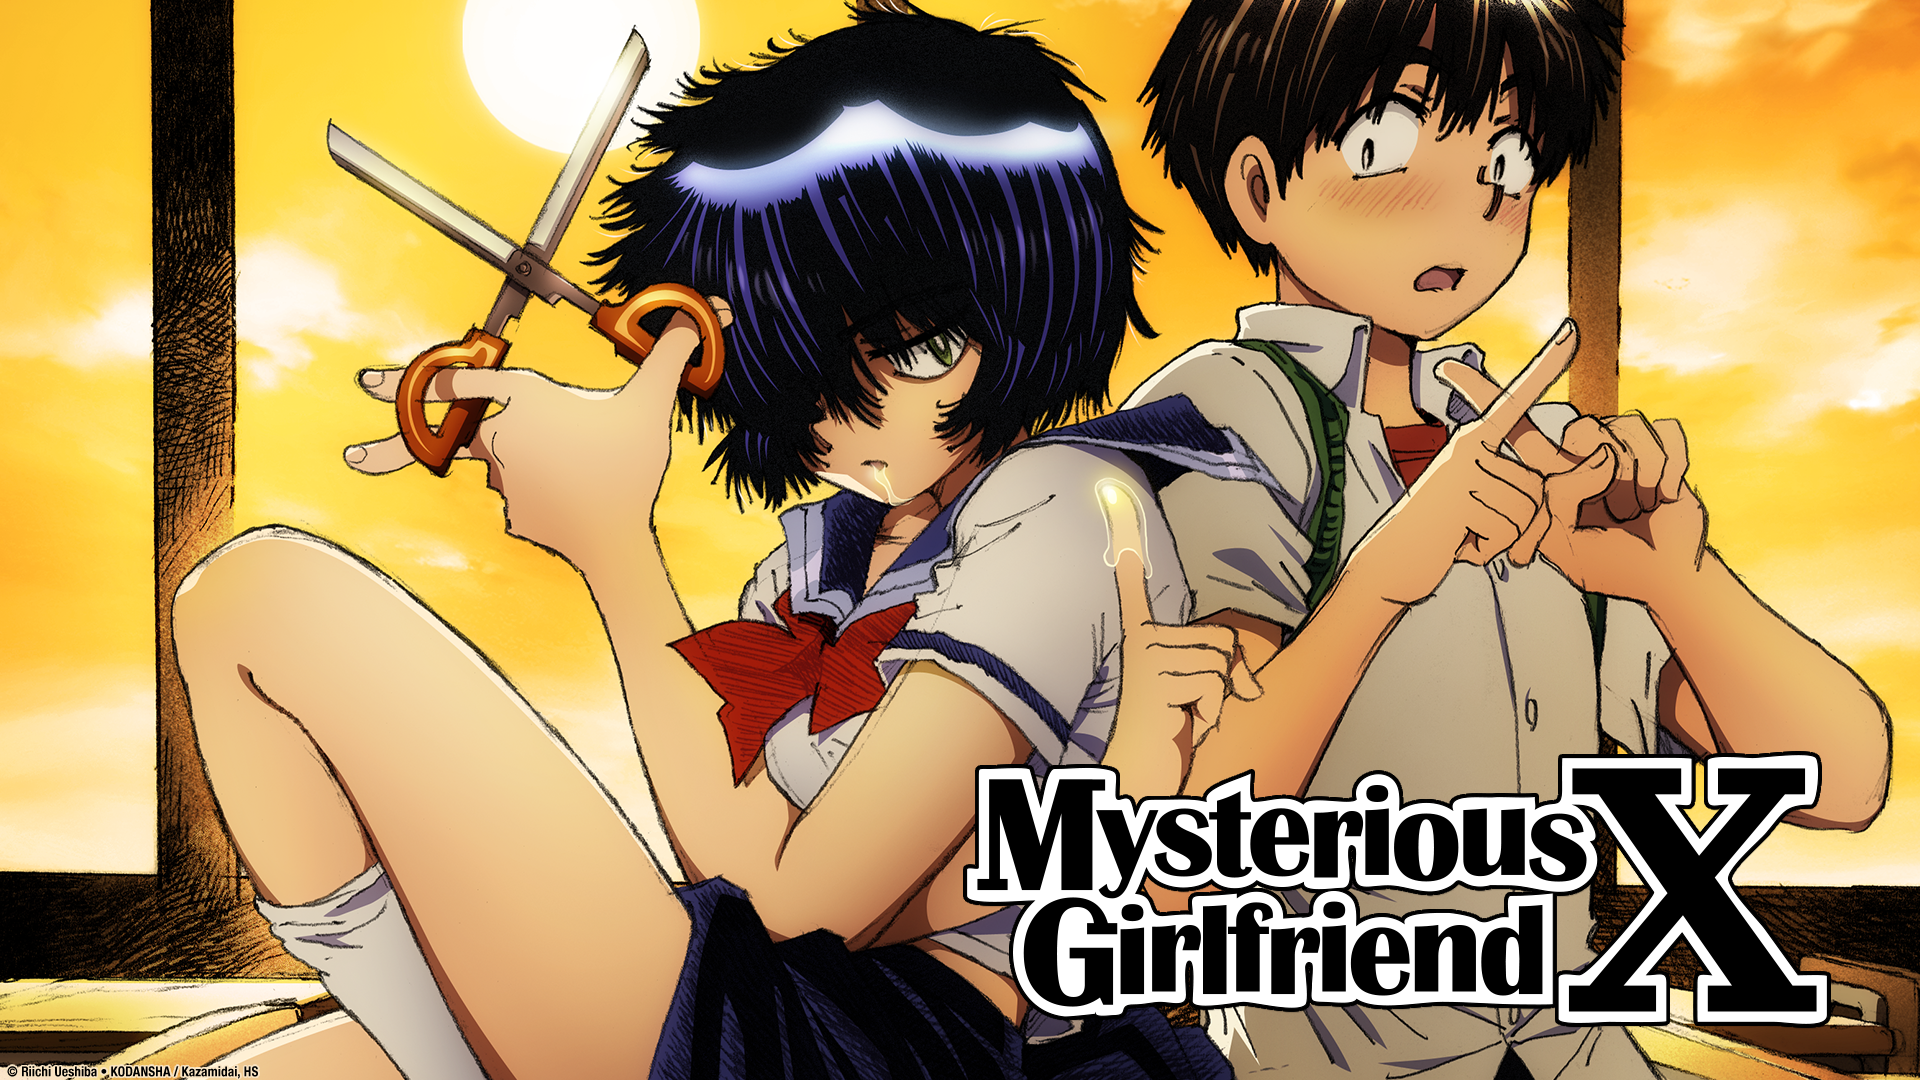 Key art and logo for Mysterious Girlfriend X